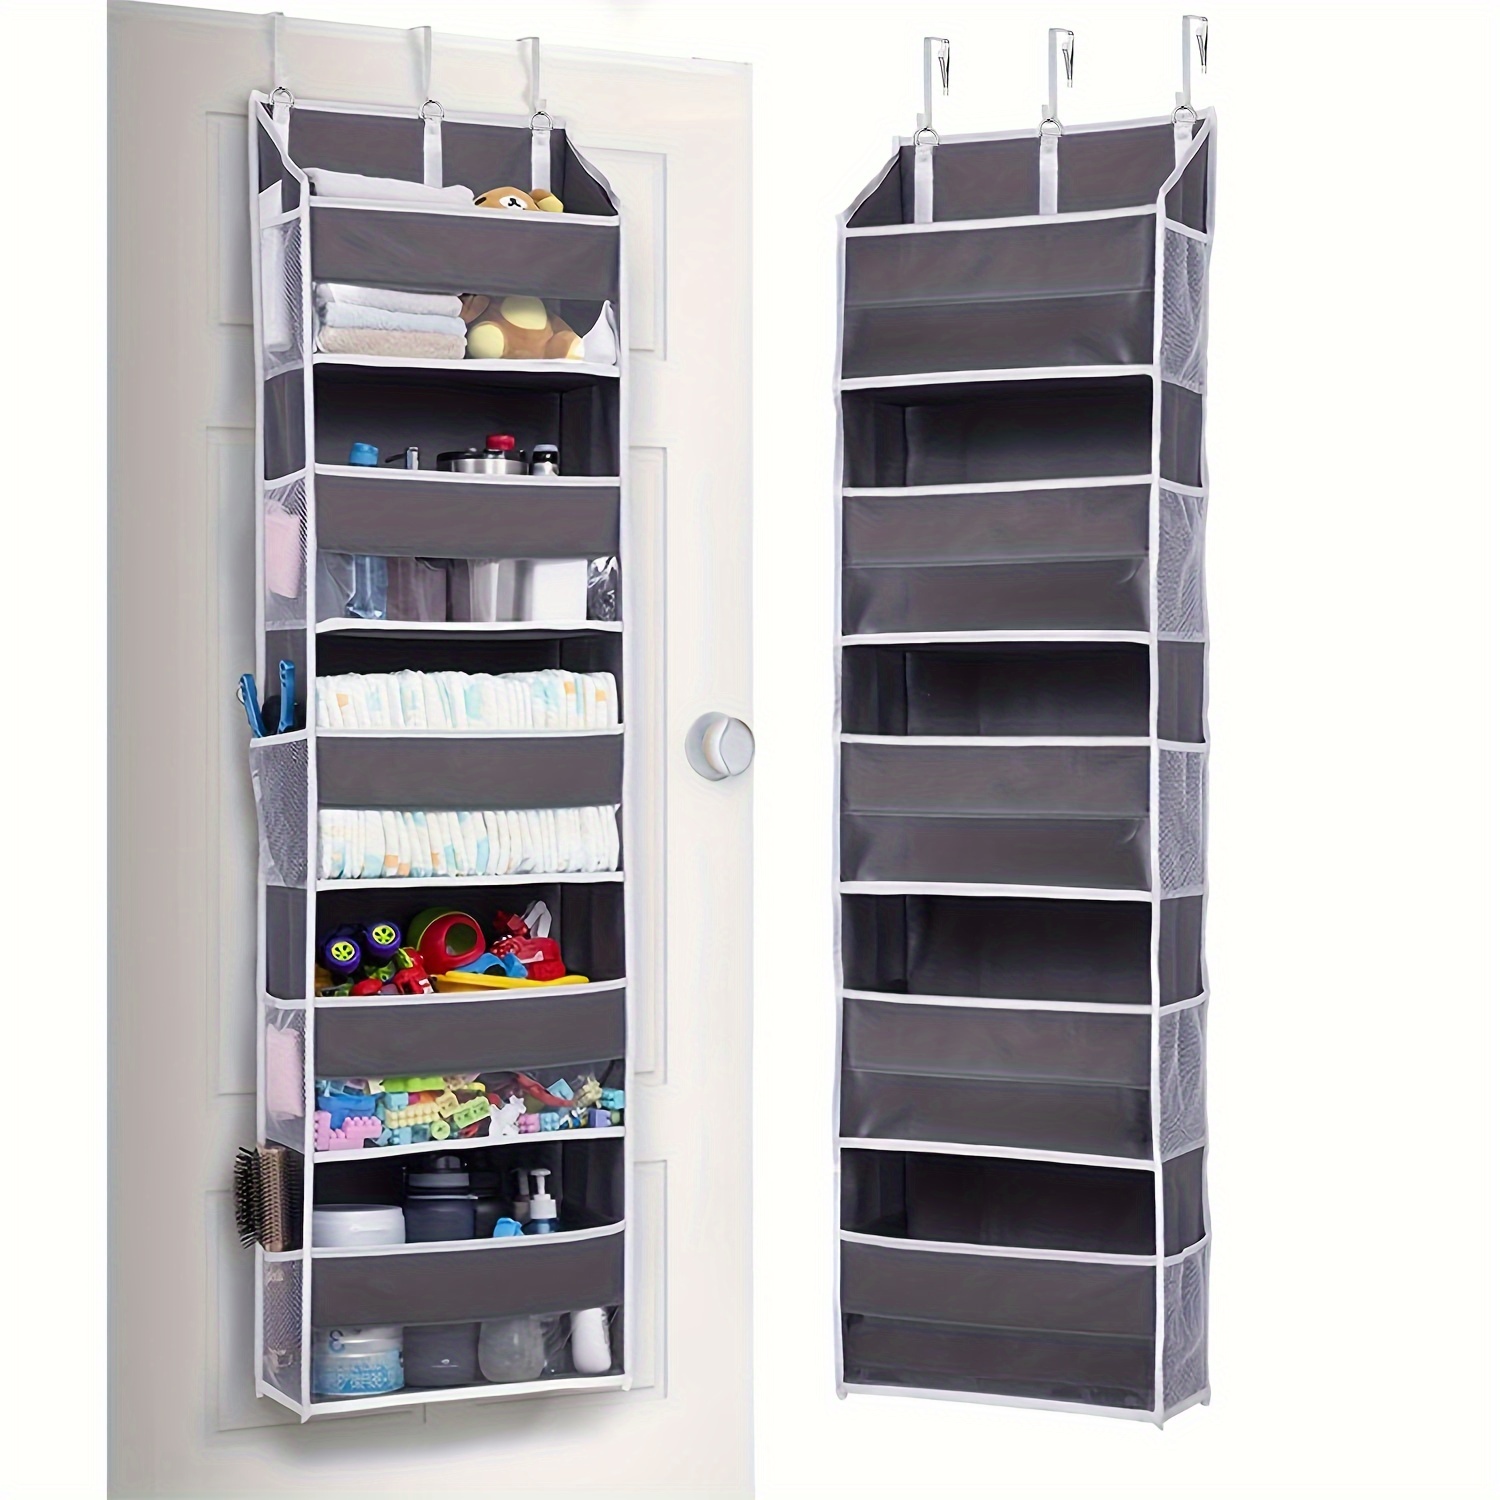 

1pc Dark Grey Over Door Organizer With 5 Large Pockets And 10 Mesh Side Pockets - Holds 44 Lbs And Perfect For Bedroom, Nursery, Kids Toys, Shoes, Diapers, And More